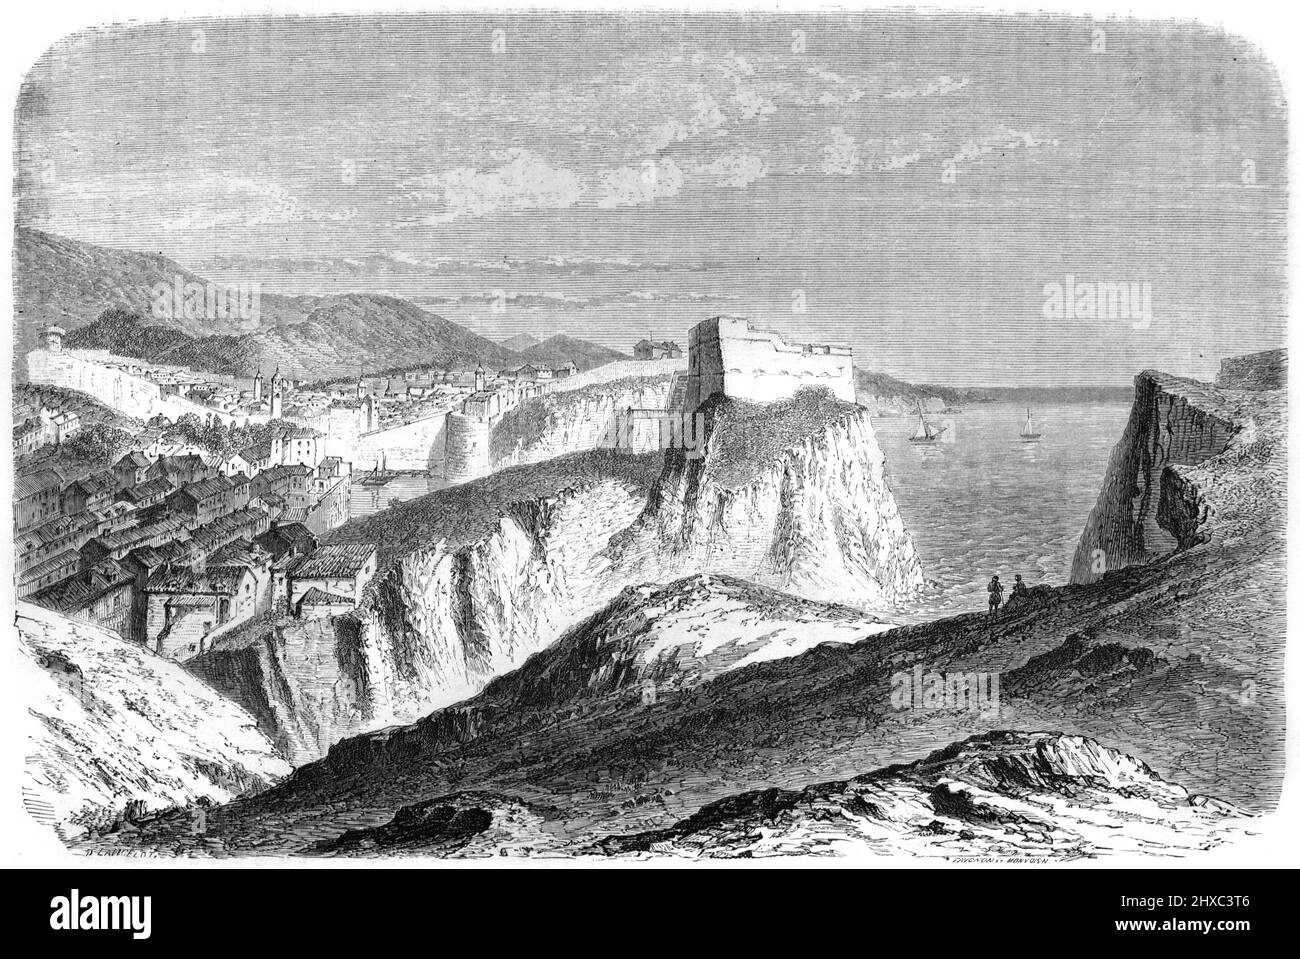 View of the Old Town Historic District and Castle of Dubrovnik Croatia. Vintage Illustration or Engraving 1860. Stock Photo